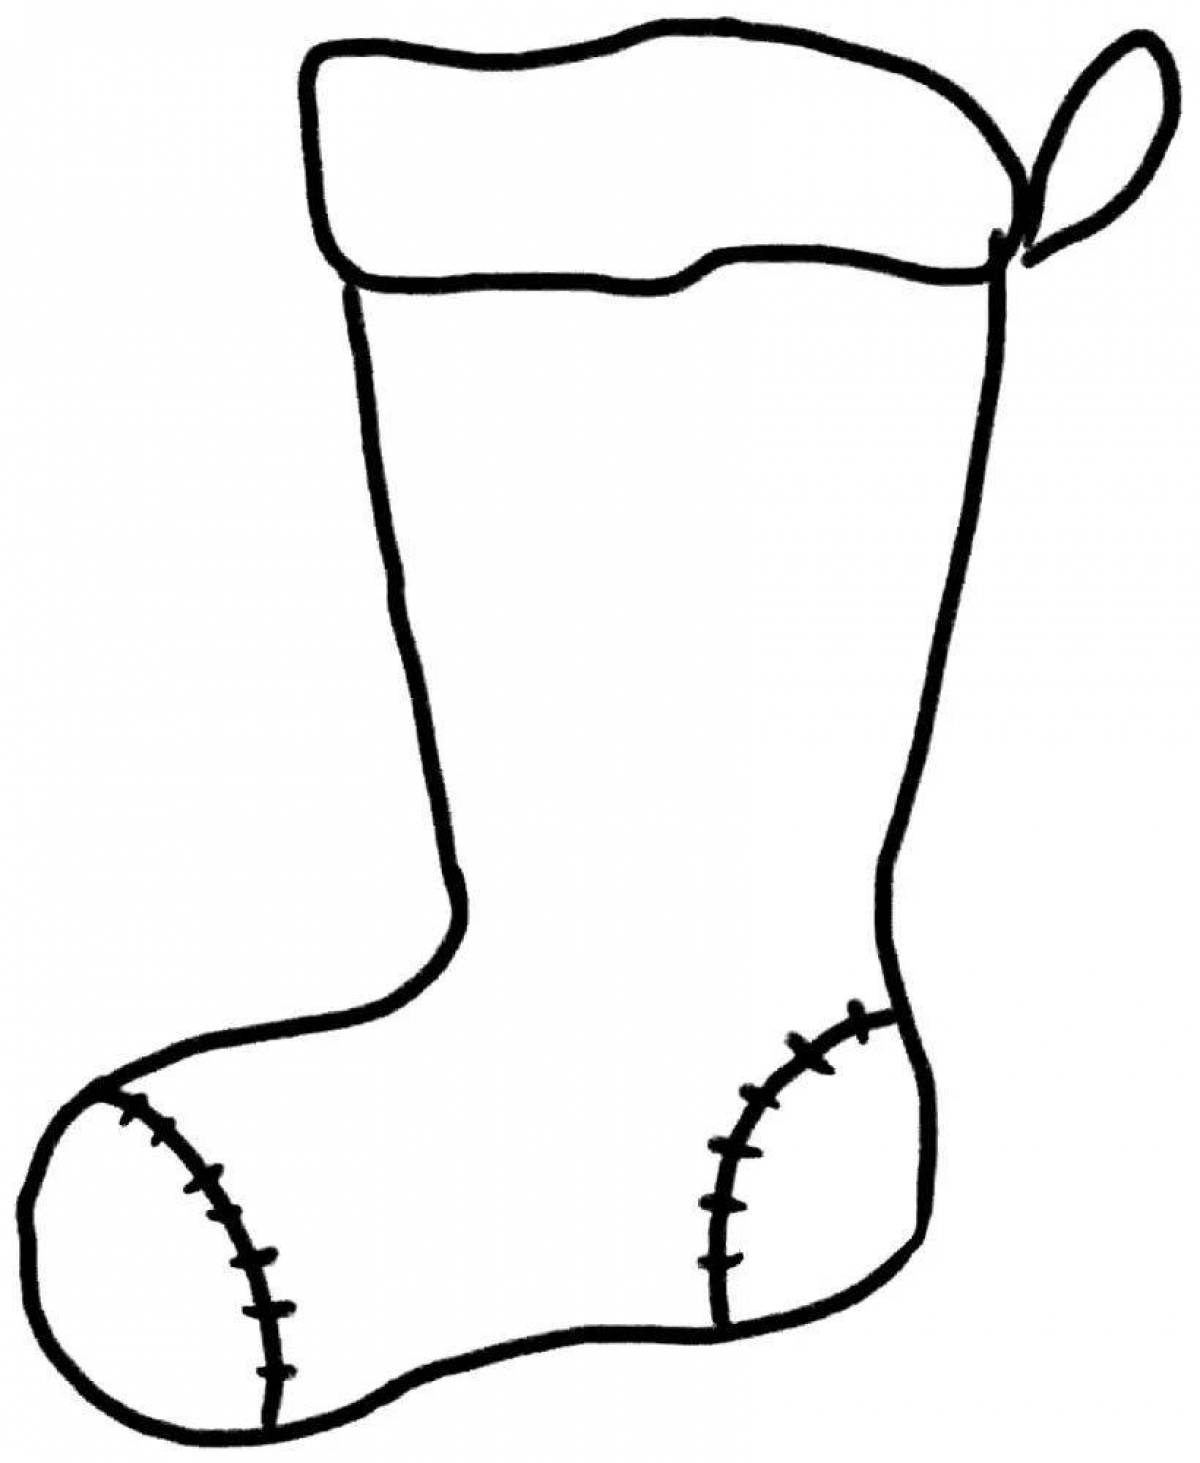 Animated socks coloring page